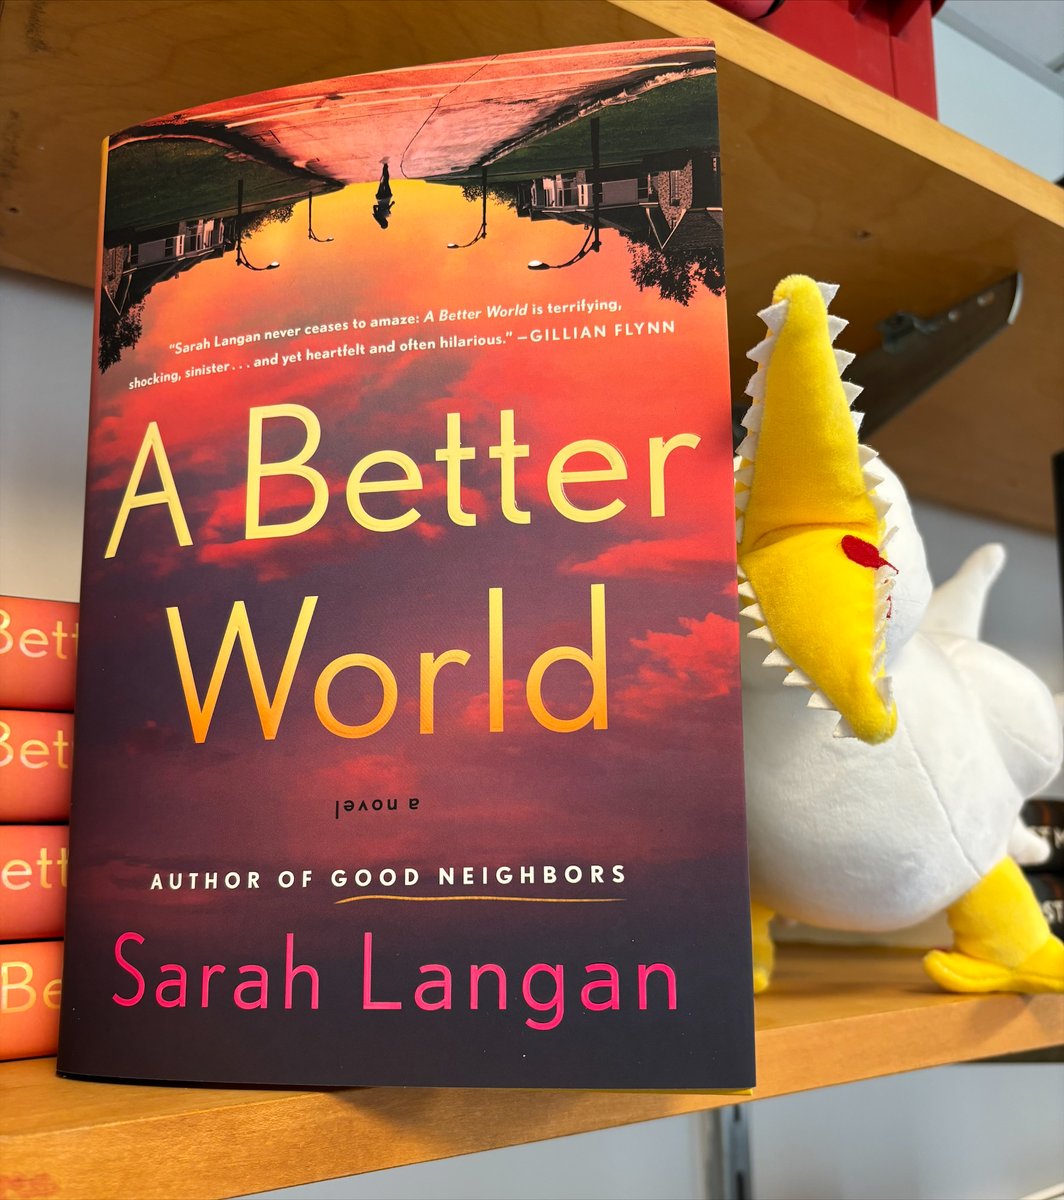 'Scathing. Thrilling. Funny. Scary. Poignant.'—@SarahVLangan1 when asked by @thenerdaily to describe her new book, A BETTER WORLD, in 5 words. 🔗thenerddaily.com/sarah-langan-a…